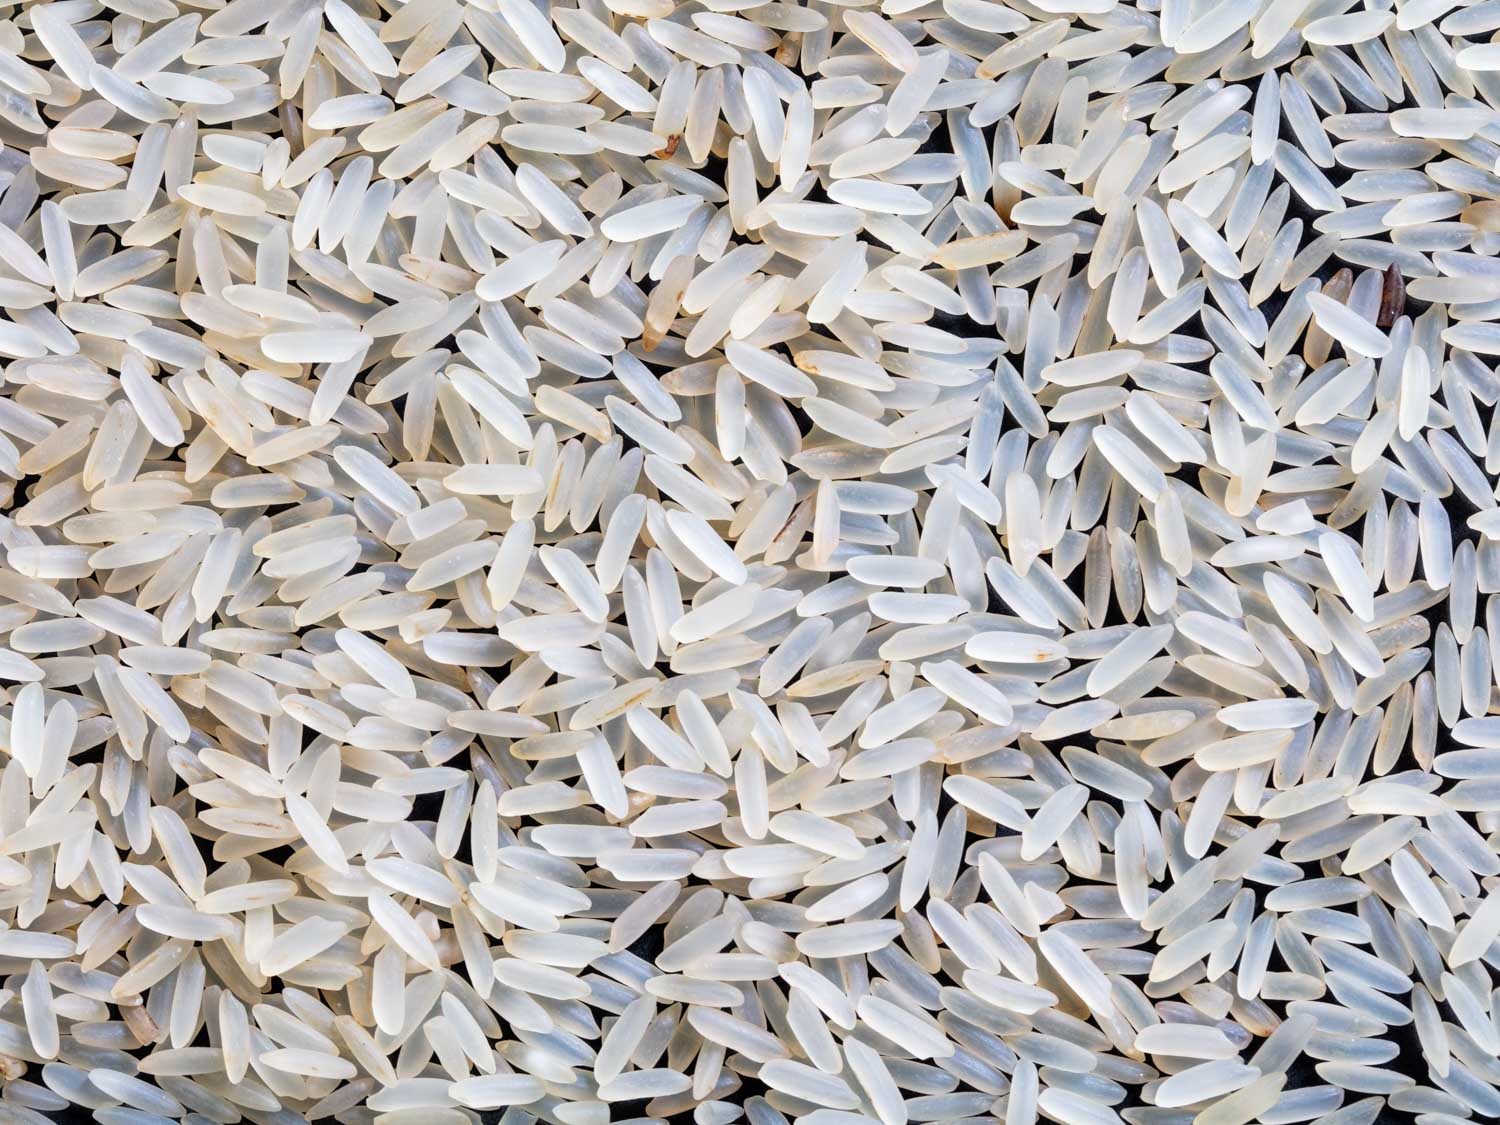 close up of extra long grain parboiled rice